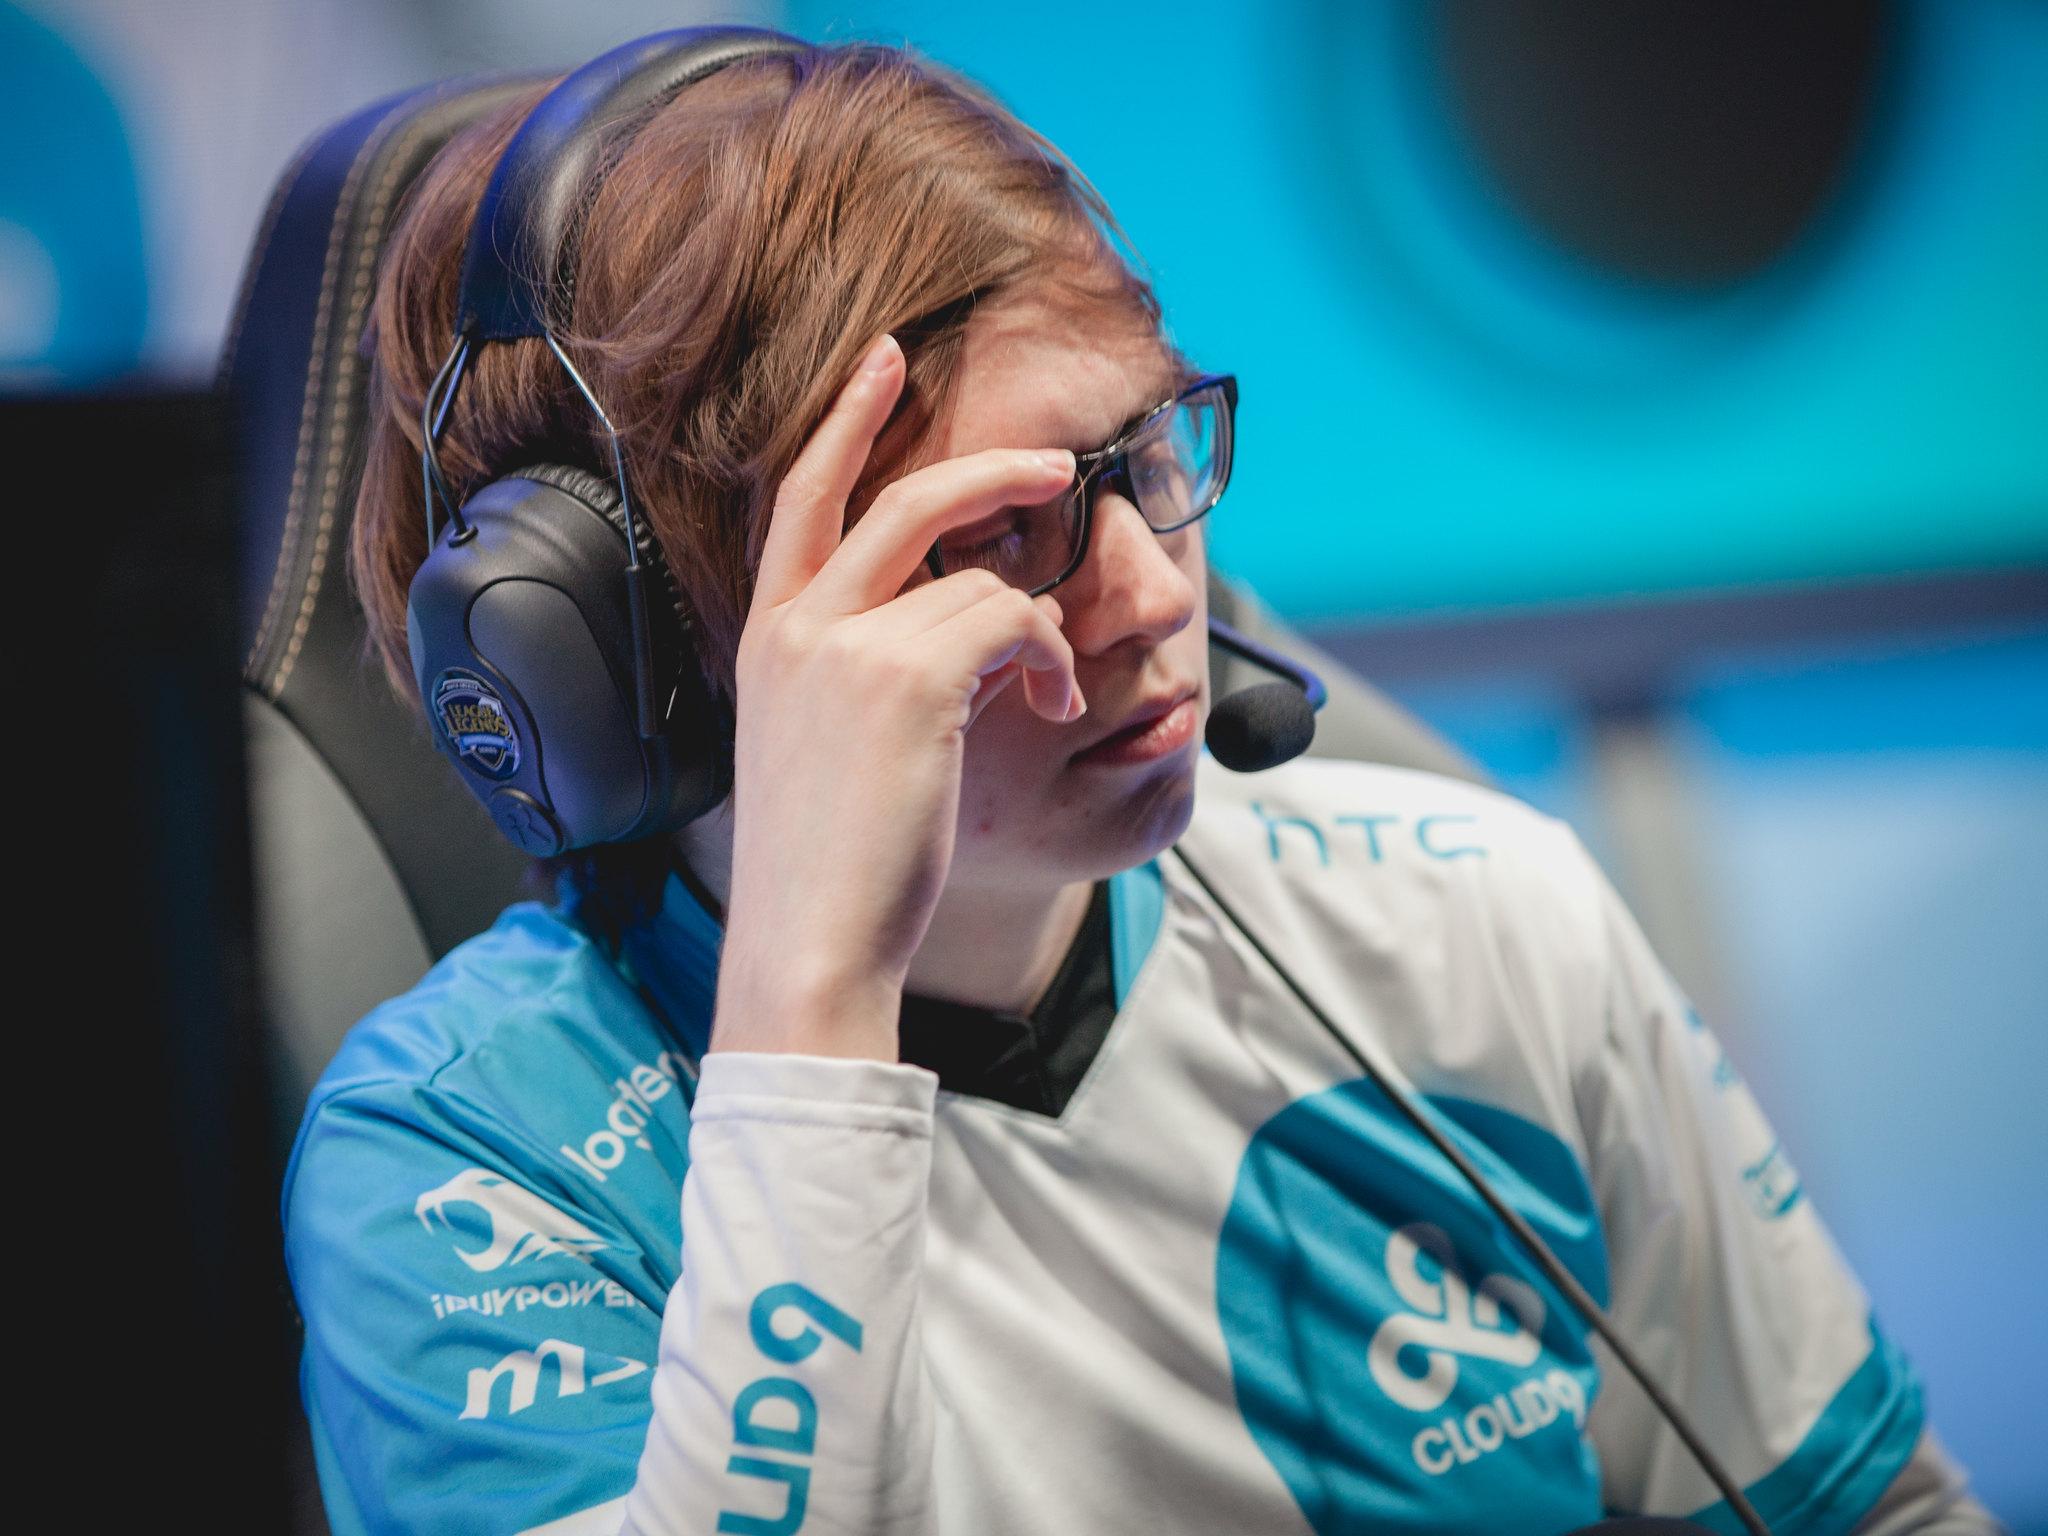 Sneaky was dropped by Cloud9 in 2019 after 339 appearances and two titles with the NA org.